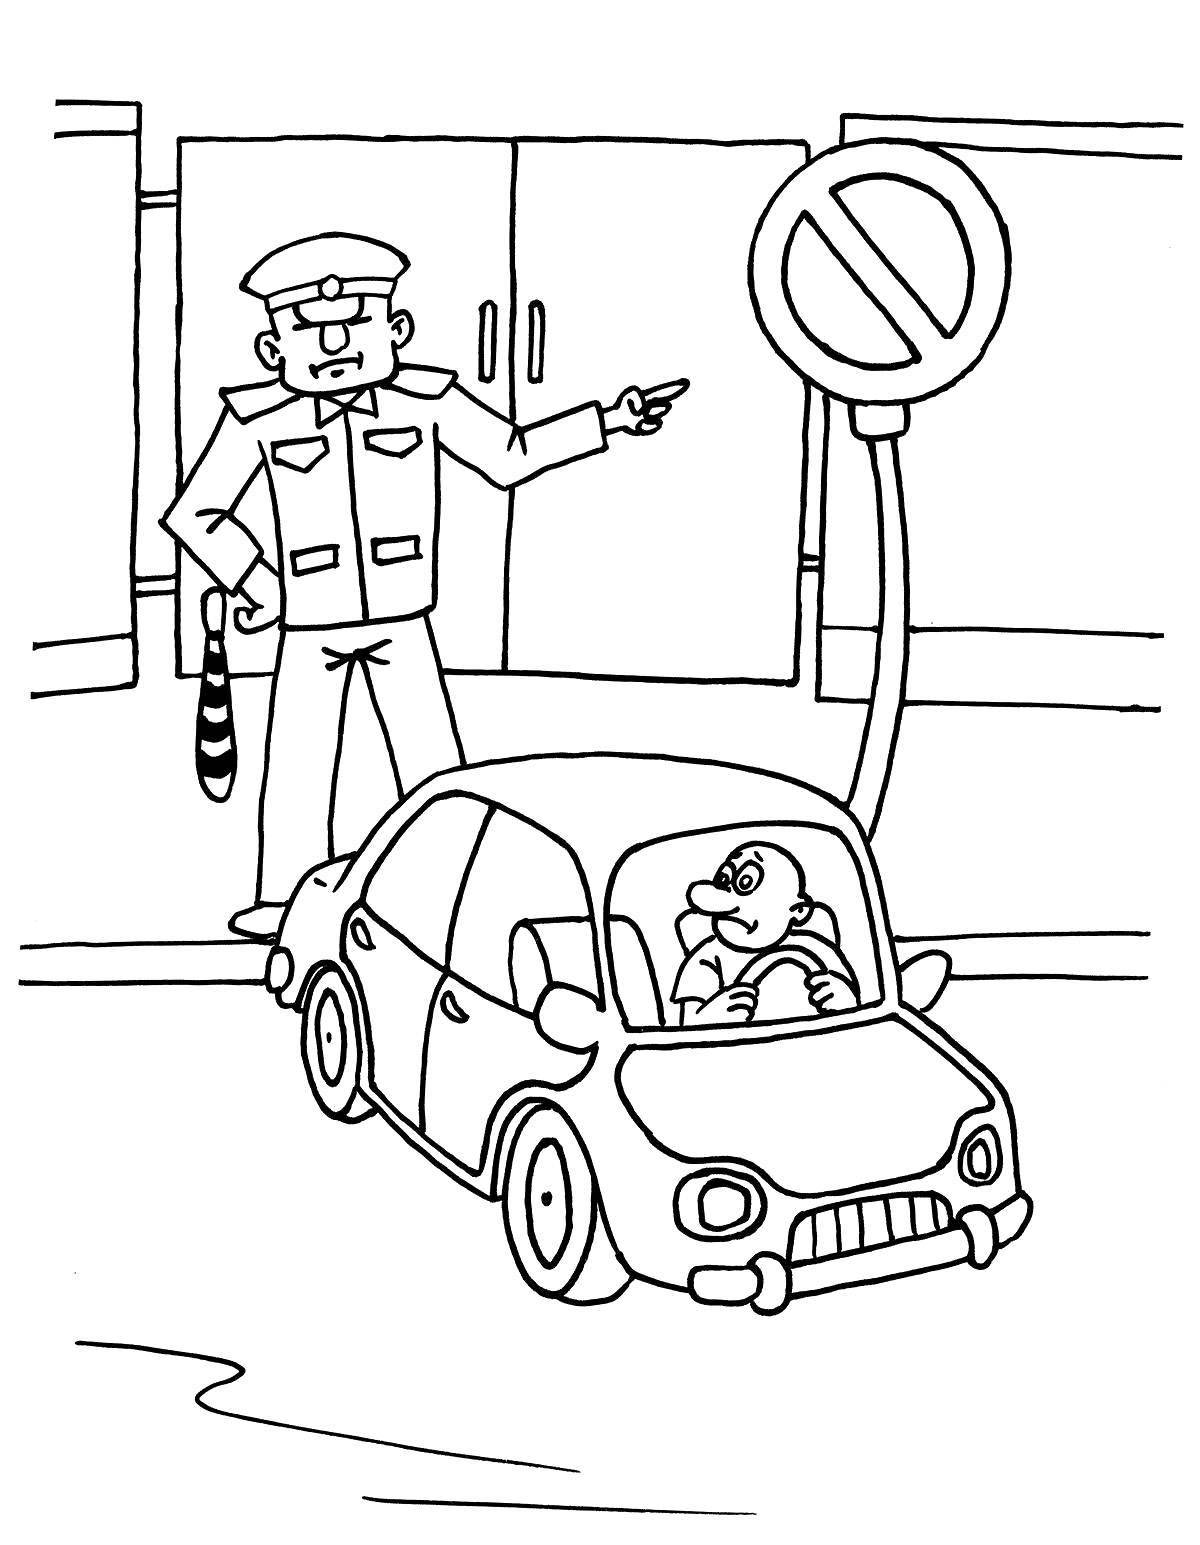 Traffic signs coloring page for 4-5 year olds